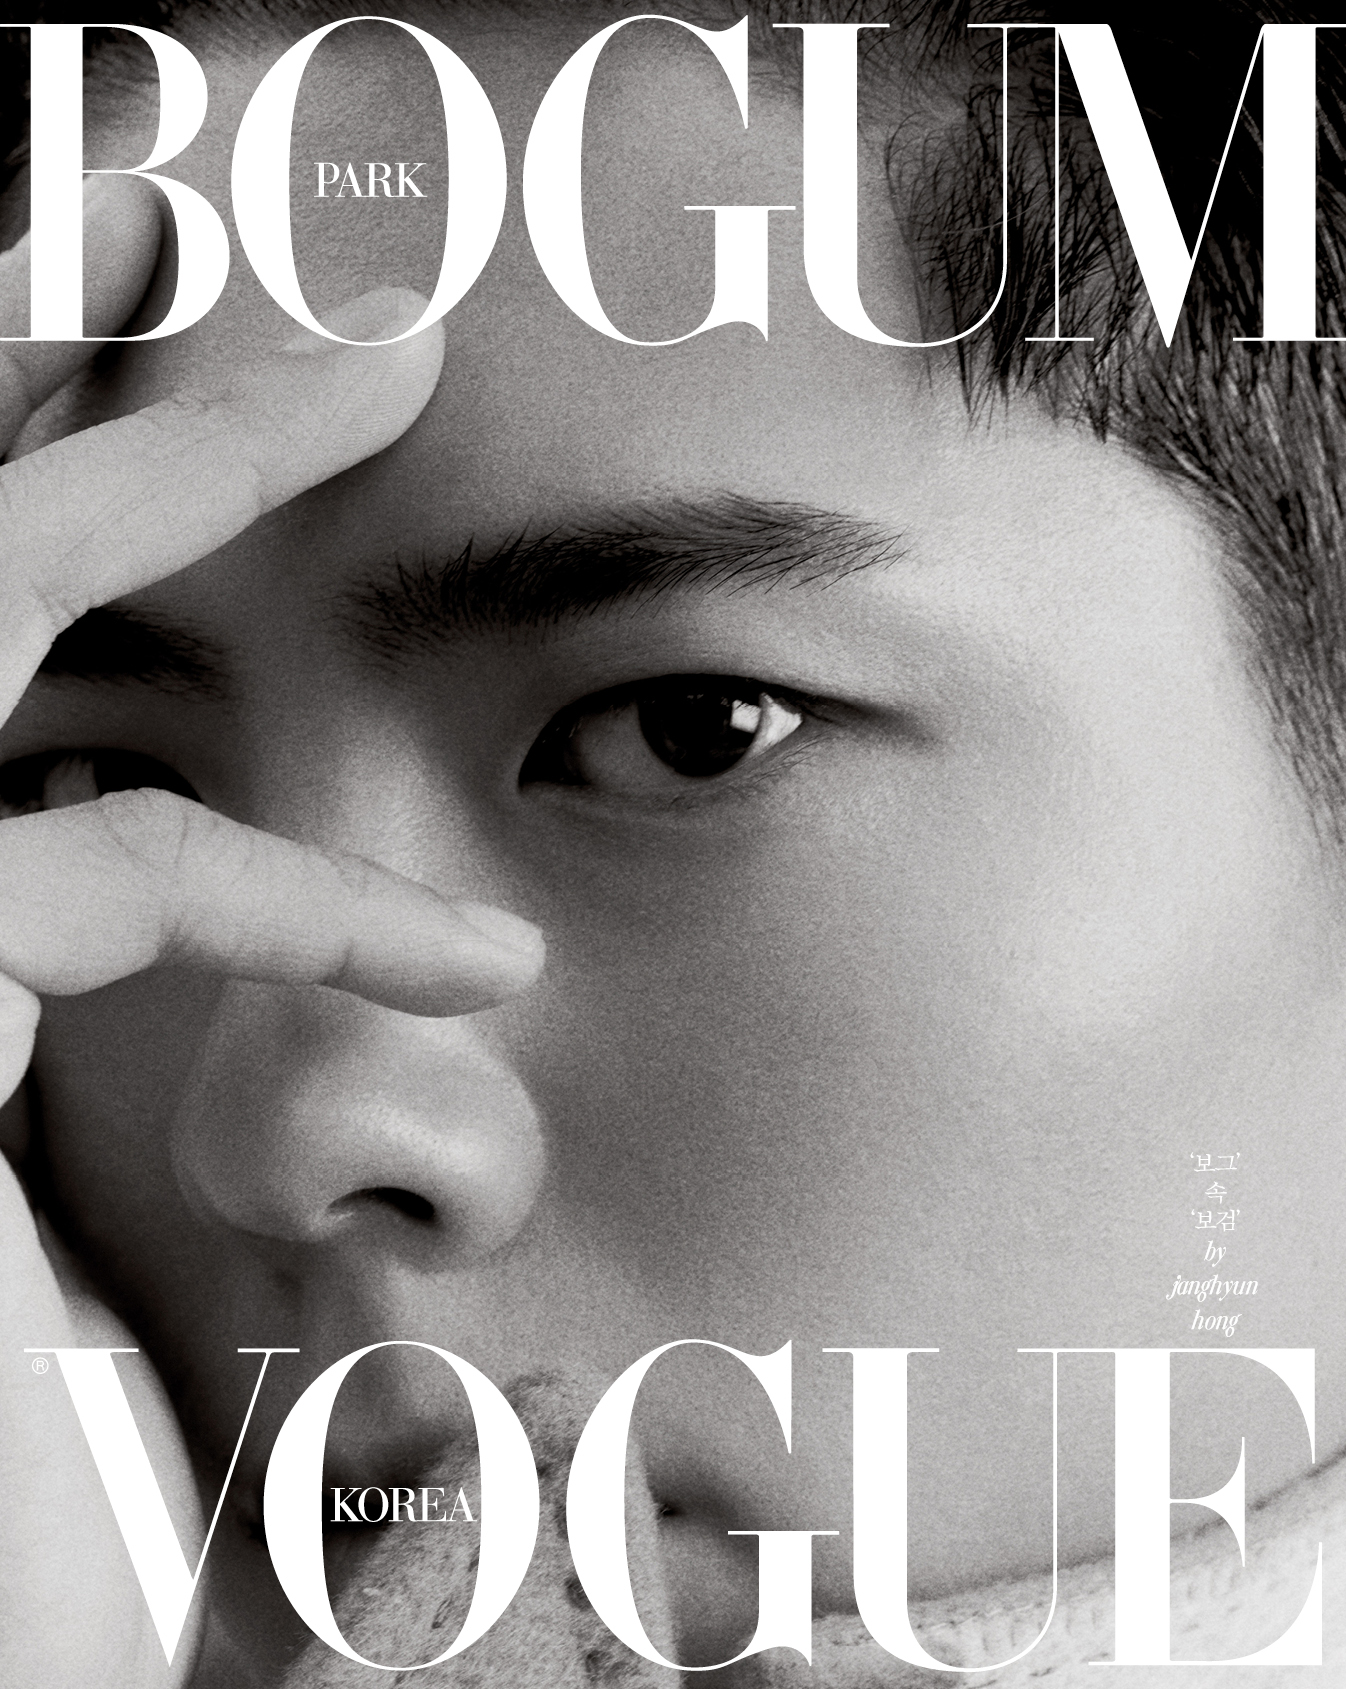 maekyung.com news teamActor Park Bo-gum has announced the current situation with a picture.On the 15th, fashion magazine Vogue Korea released a cover picture of the 24th anniversary issue with Park Bo-gum.This film, which was held at Changdeokgung, created an emotional visual that seemed to see a movie on the other hand, combining the premiere beauty of the palace and the restrained masculine beauty of Actor Park Bo-gum.In addition, through Interview, there will be genuine stories about the thoughts and values ​​of twenty-eight Park Bo-gum.According to the official, Park Bo-gum Actors proposal to promote the beauty of Korea has made me shoot at Changdeokgung. Park Bo-gum is a warm and caring inner owner, but he is more cool professional than anyone else in his work. The picture and interview of Vogue Korea was published in Korea, Taiwan, Thailand, Hong Kong edition Vogue and Chinese edition Vogue ME, and proved the power of Park Bo-gum, which captivated Asia.The August issue of Vogue Korea, which includes the picture and interview of Park Bo-gum Actor, will be published on the 20th.